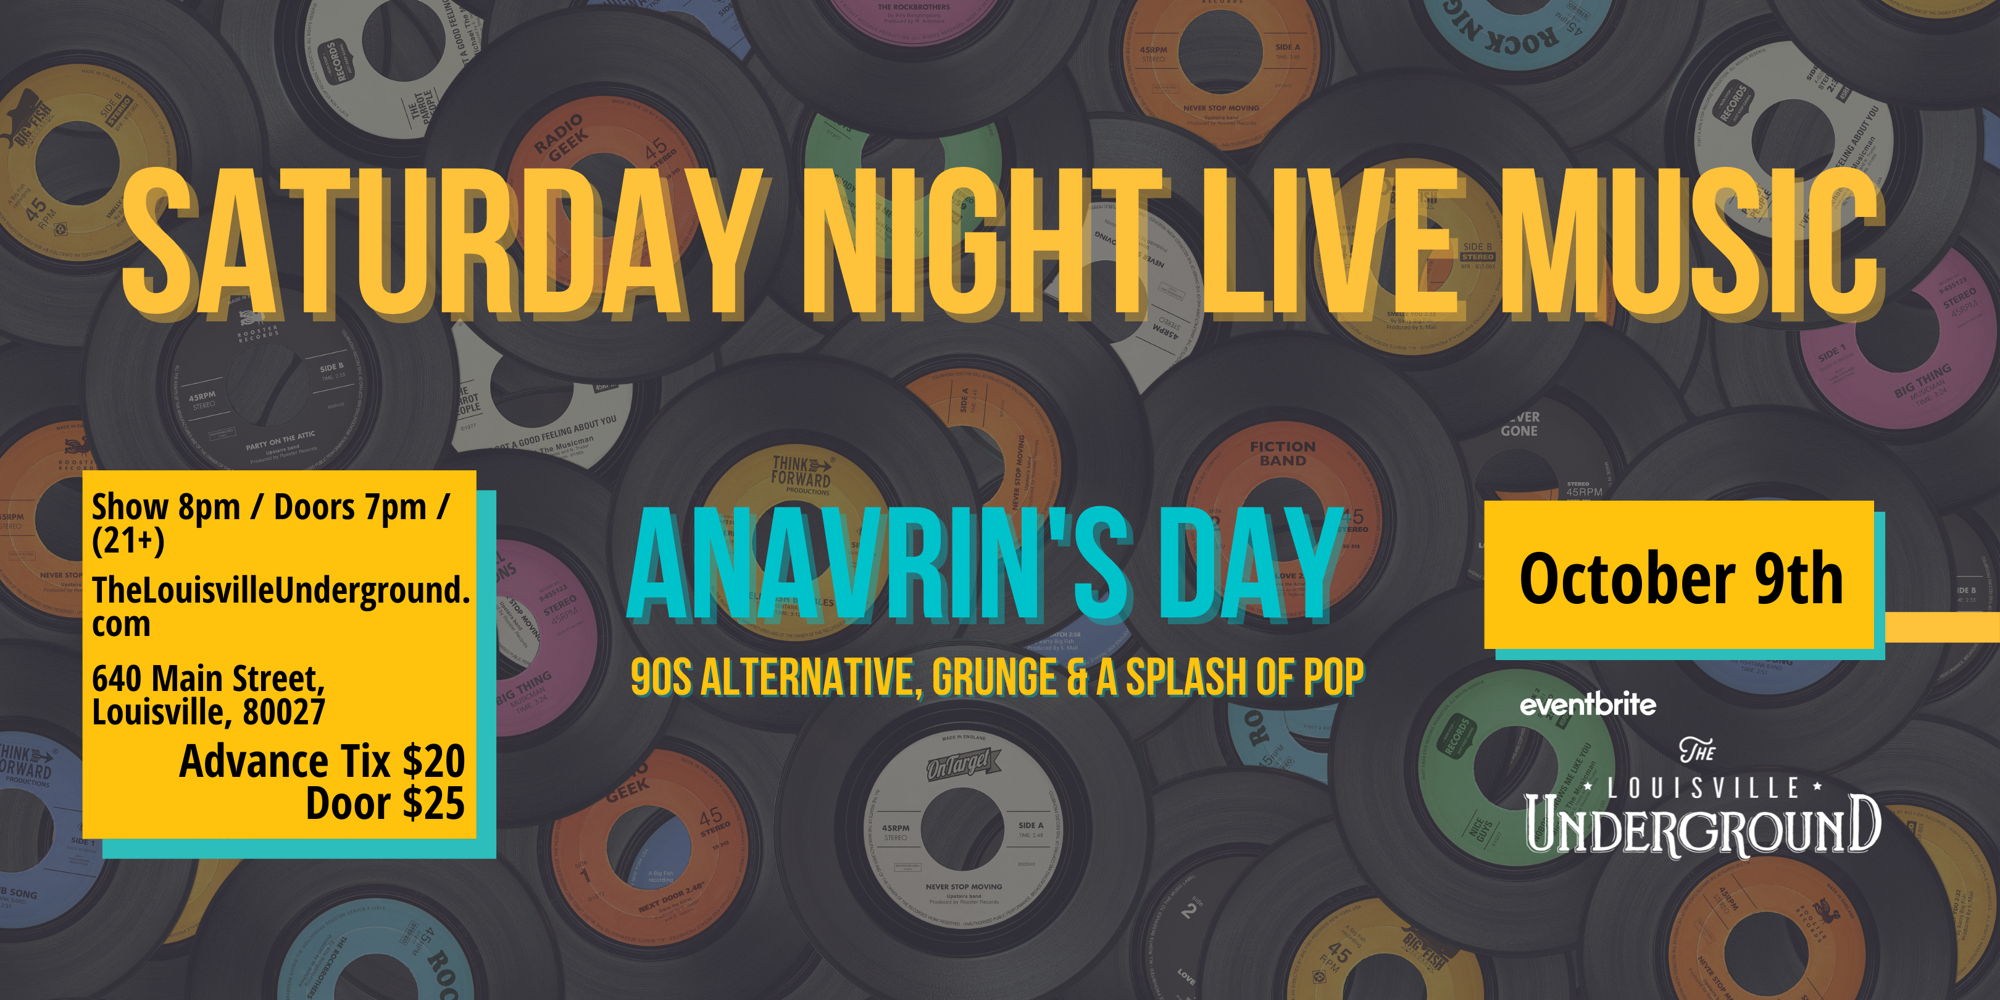 Anavrin's Day promotional image